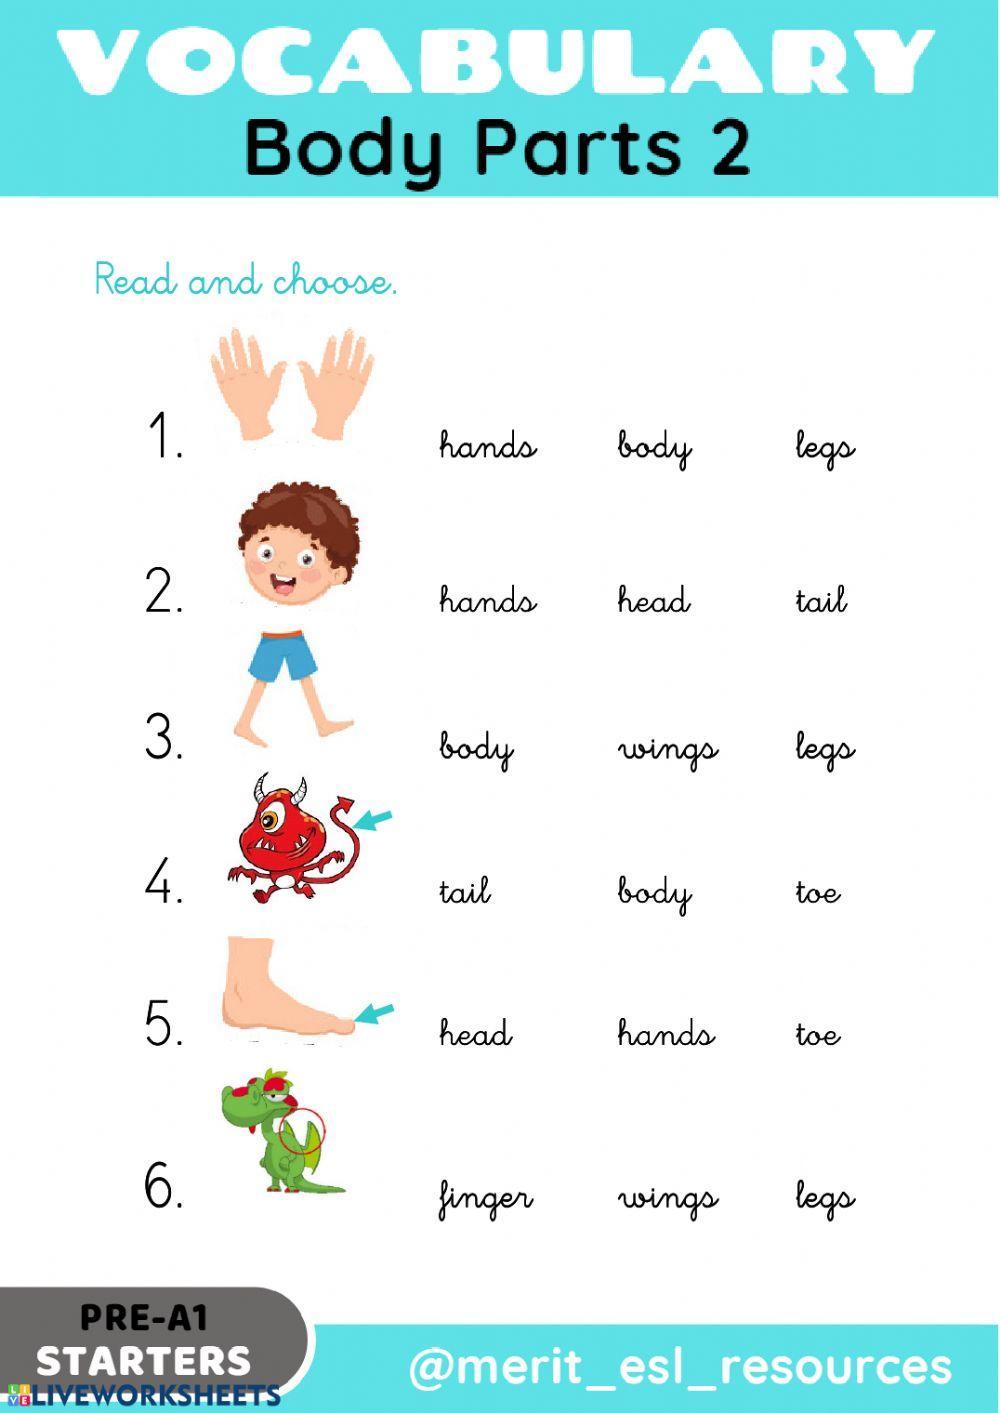 Body Parts - Read and choose